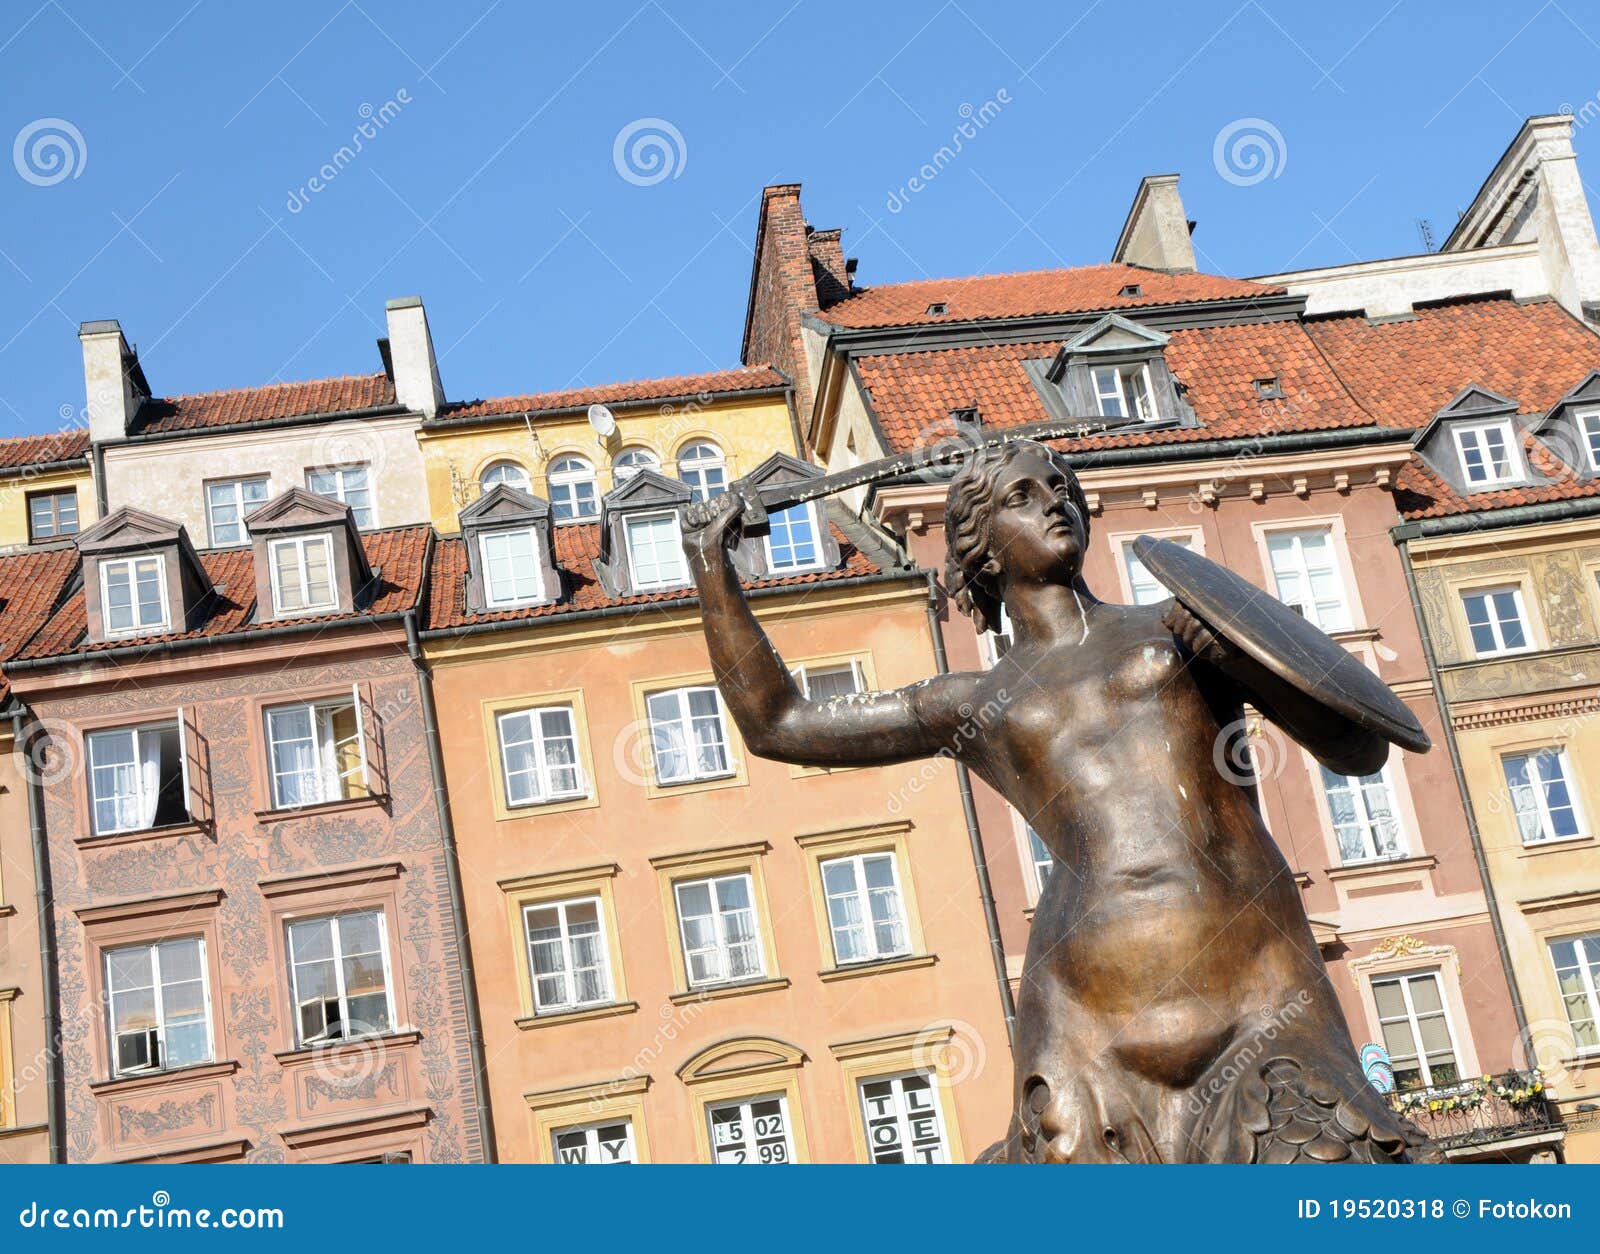 statue of mermaid, old town in warsaw, poland